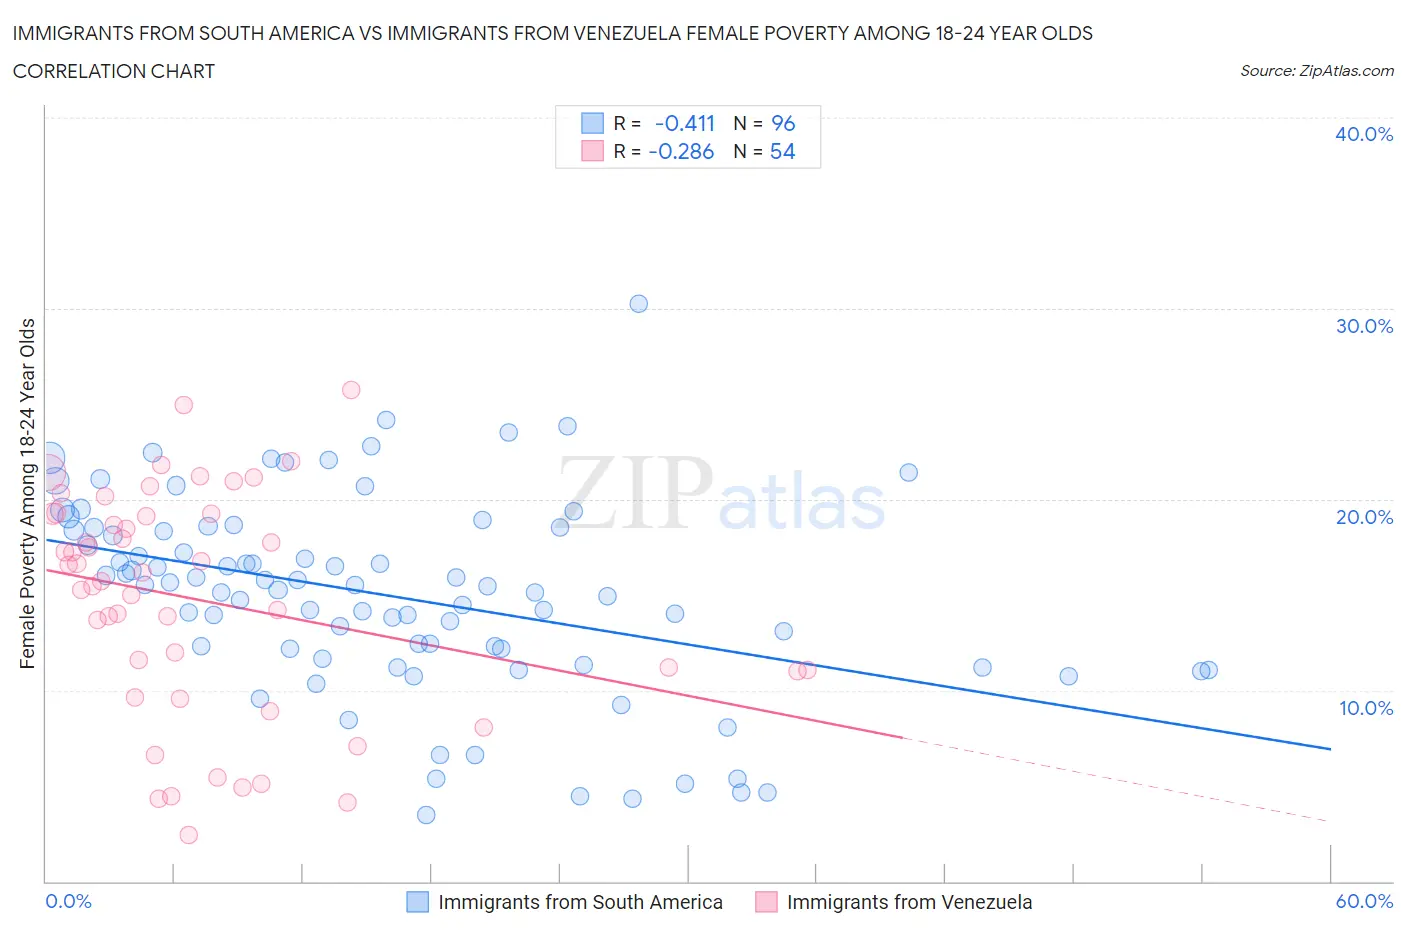 Immigrants from South America vs Immigrants from Venezuela Female Poverty Among 18-24 Year Olds